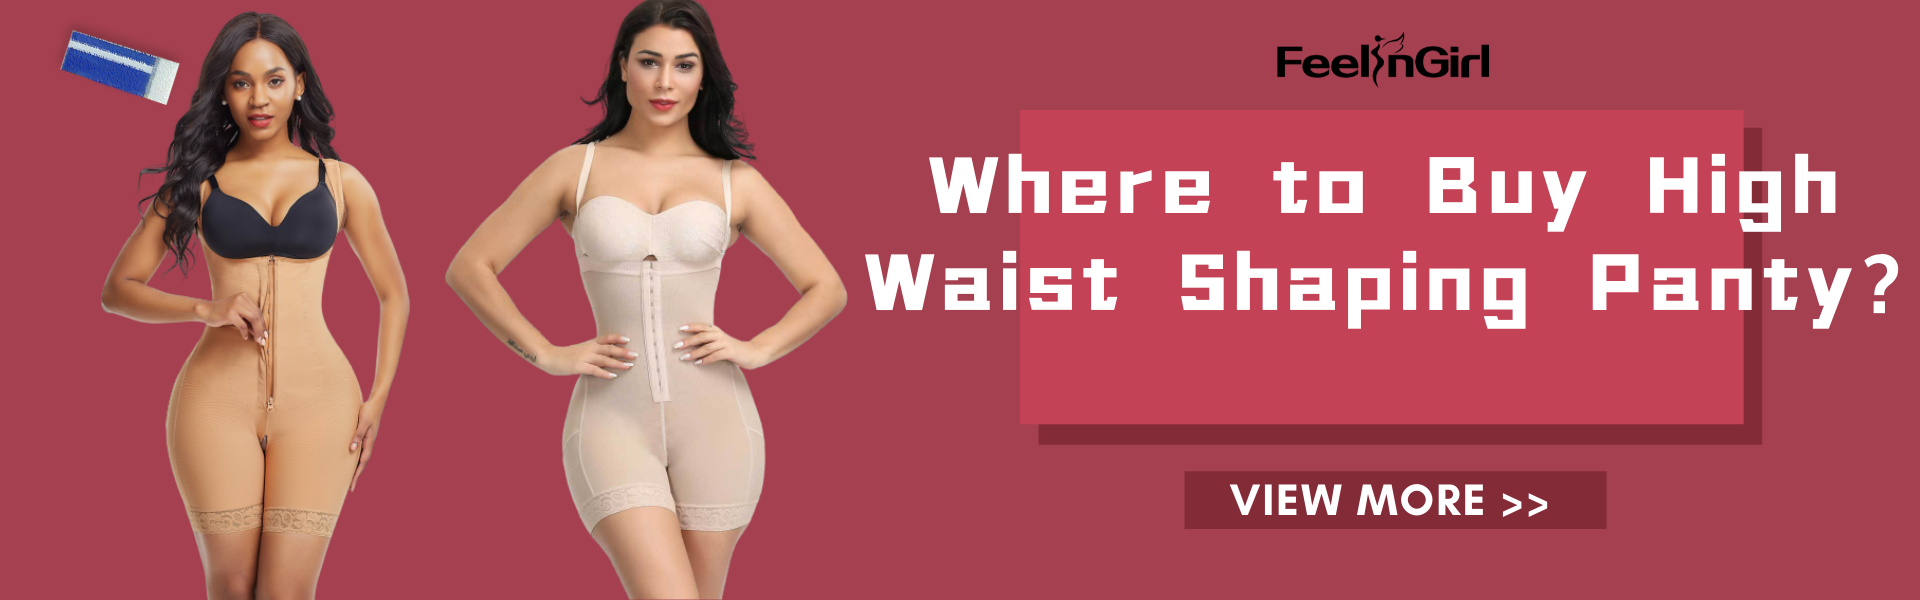 Where to Buy High Waist Shaping Panty?